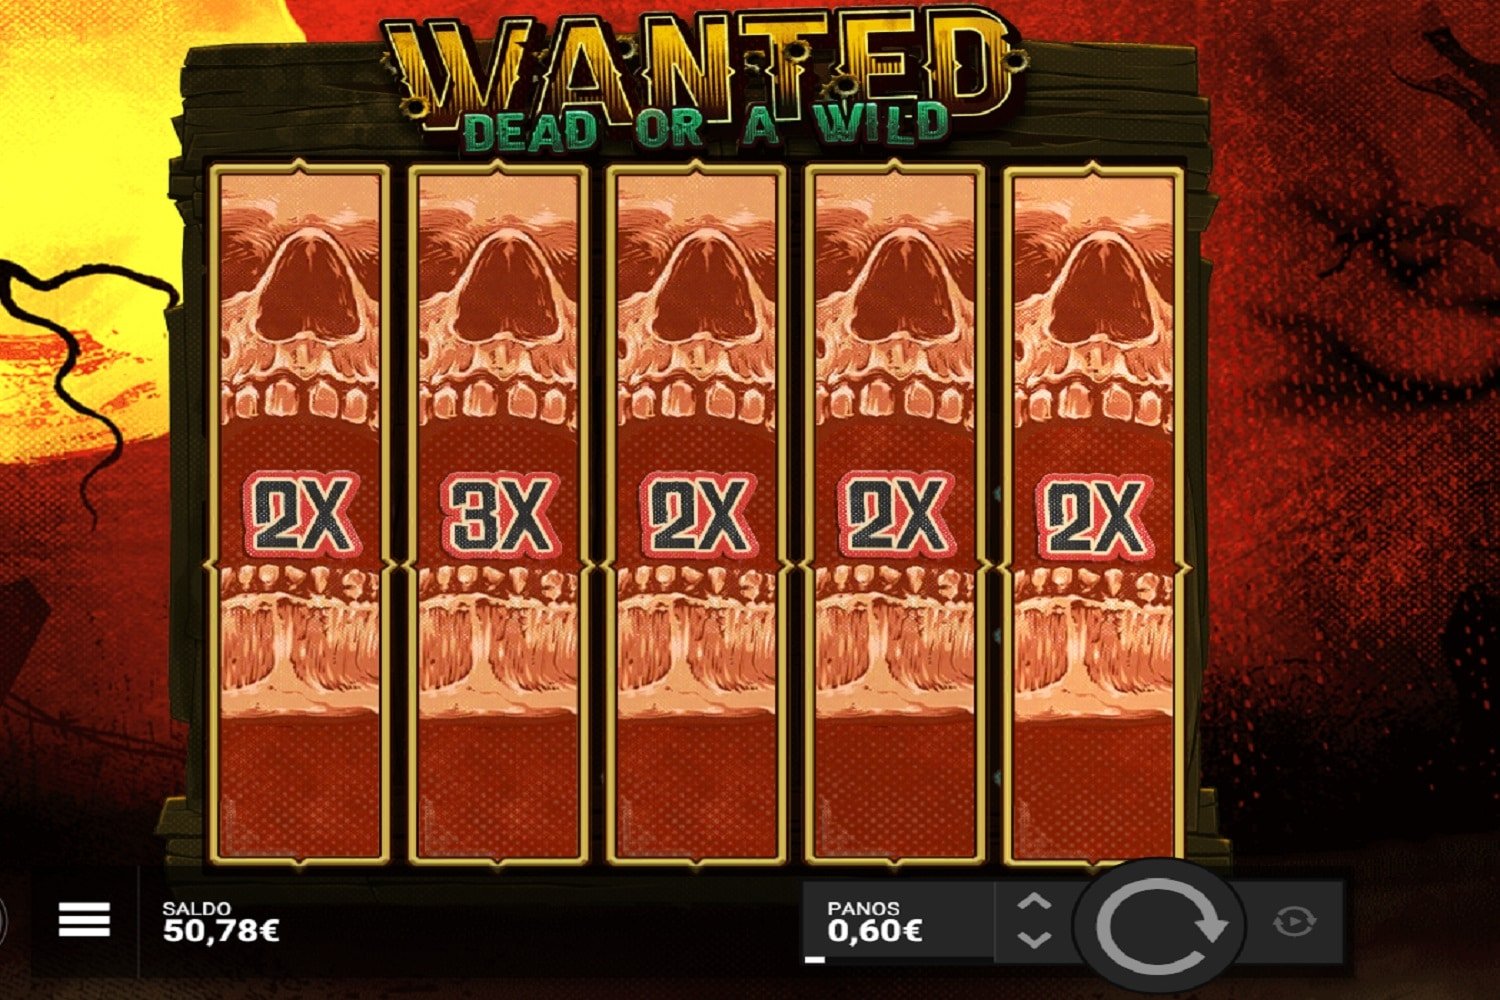 Wanted Dead or a Wild Casino win picture by CHINX 1980€ 3300x 7.11.2022